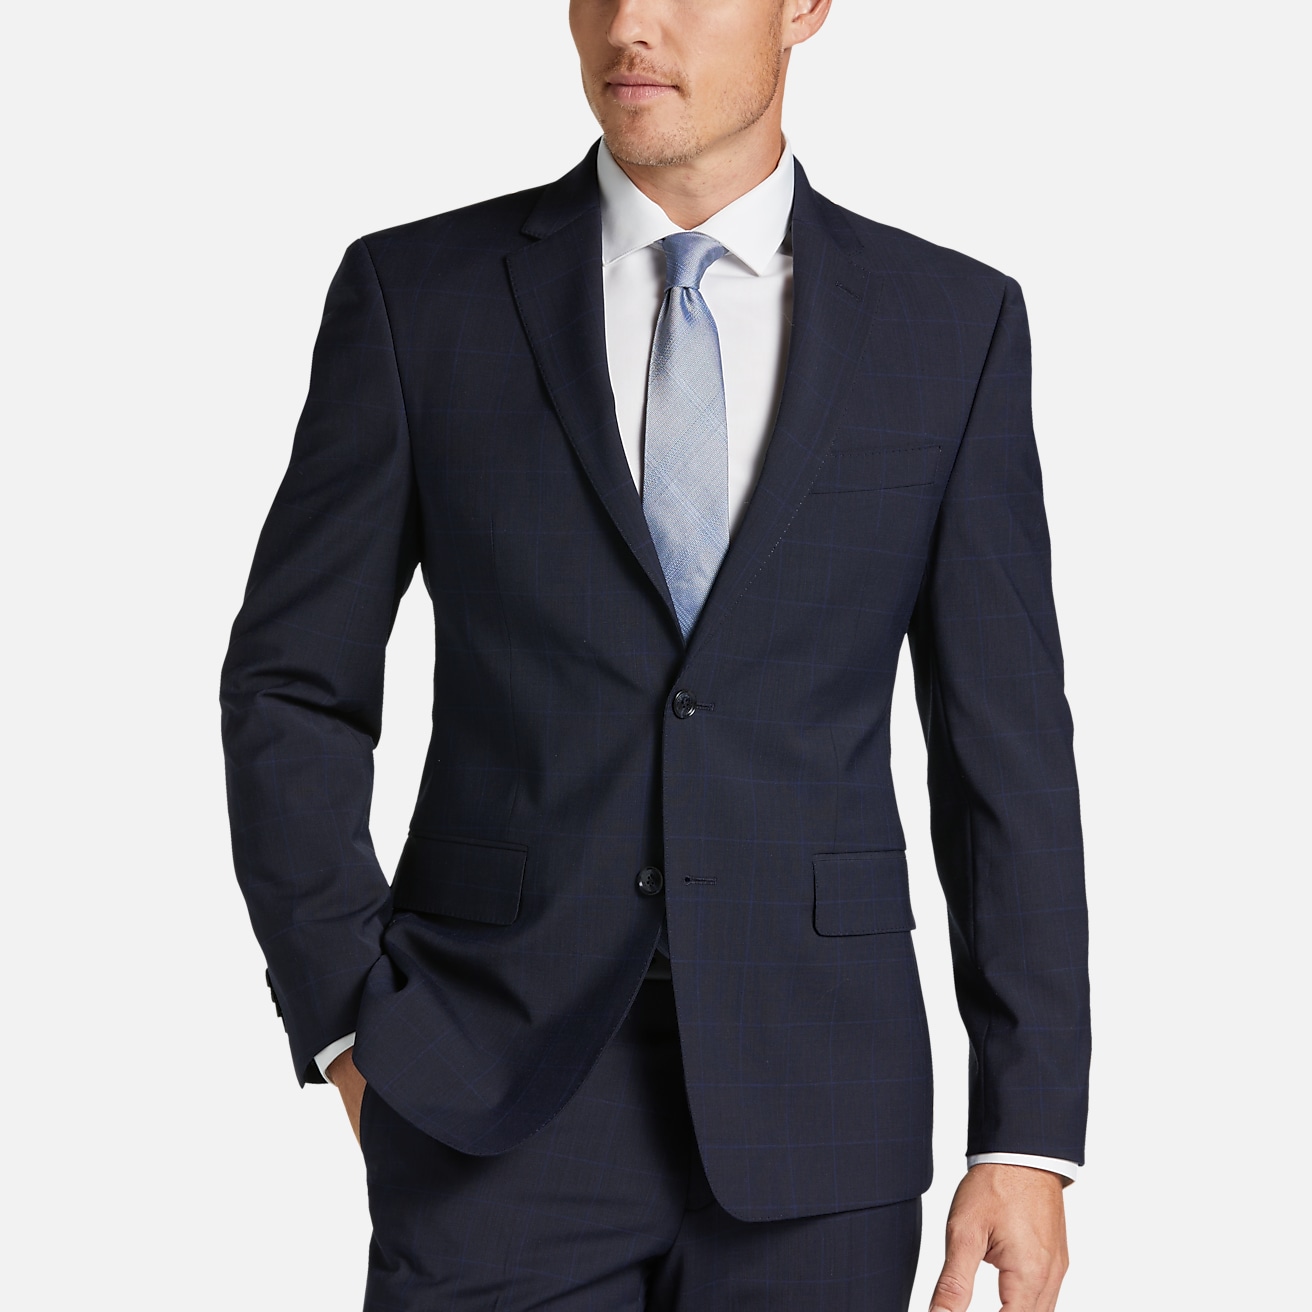 https://image.menswearhouse.com/is/image/TMW/TMW_3VTY_61_TOMMY_HILFIGER_2_PIECE_SUITS_NAVY_PLAID_MAIN?imPolicy=pdp-mob-2x